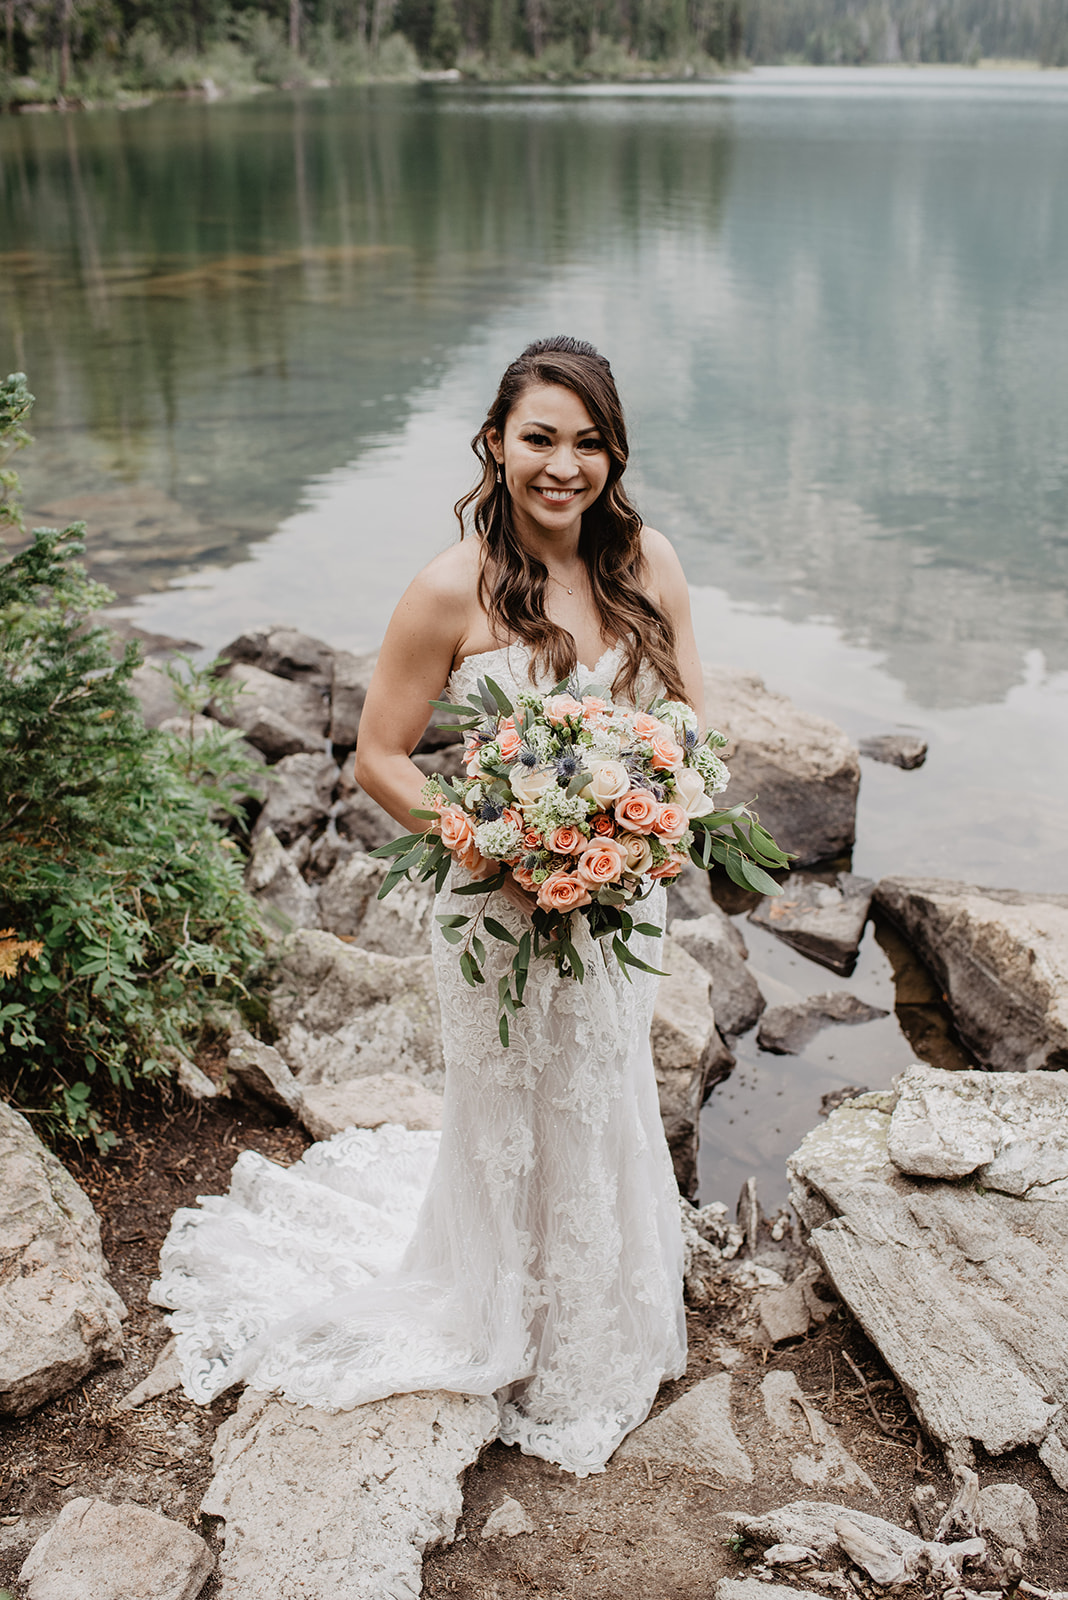 bride with a beautiful wedding bouquet with roses and thistles stands next to Taggart Lake in the Grand Tetons and smiles up at the camera